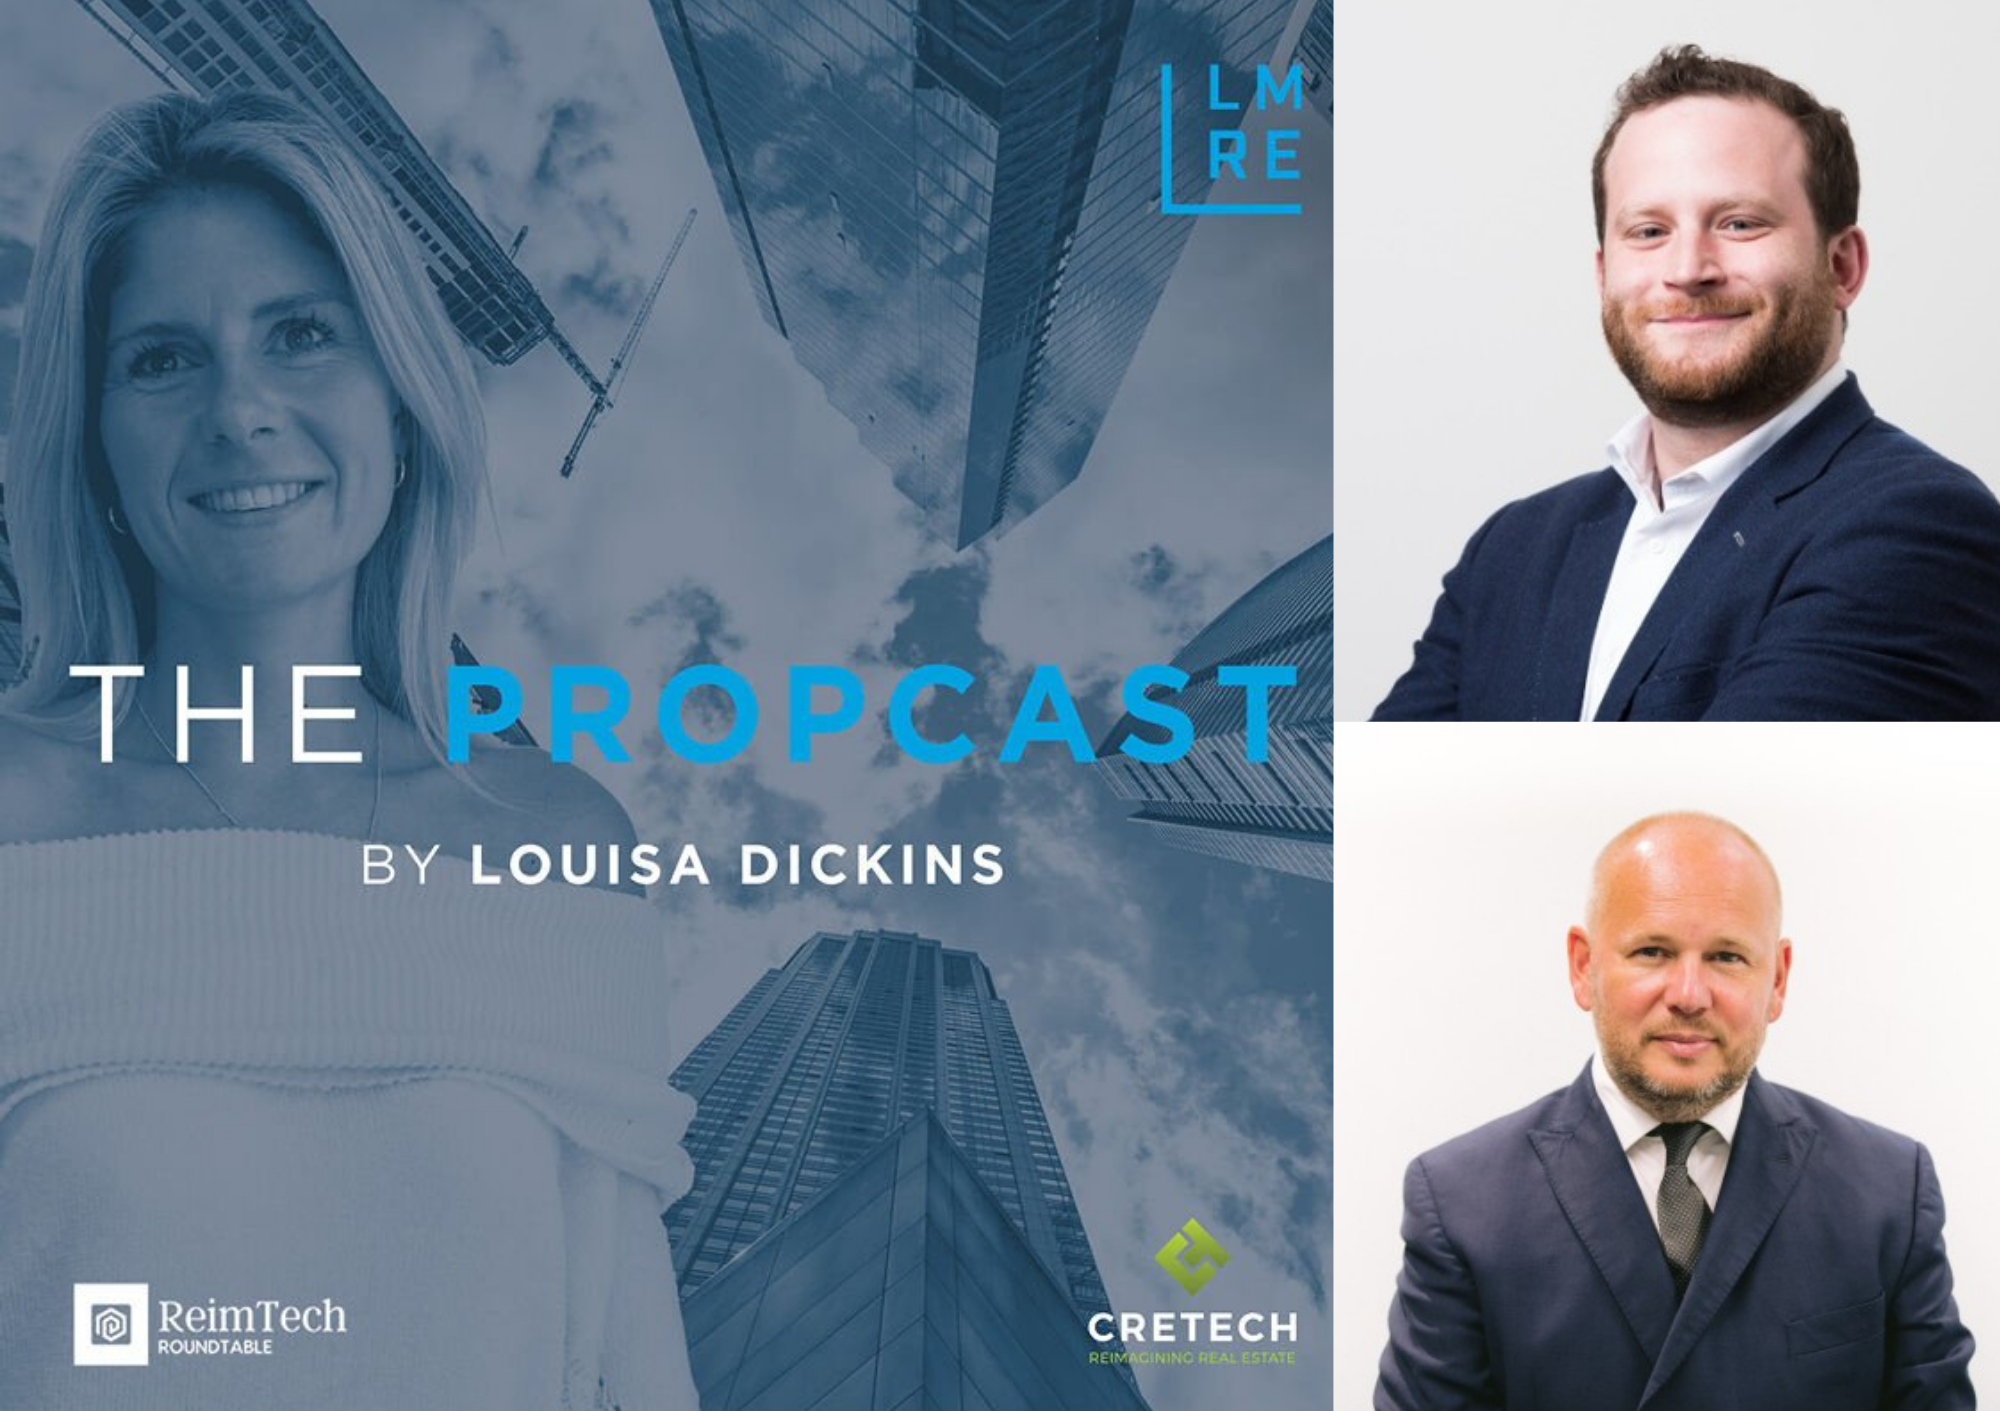 The Propcast: Real Estate, Tech Collaboration and US Launching with Real Estate with Oli Farago and Richard Croft